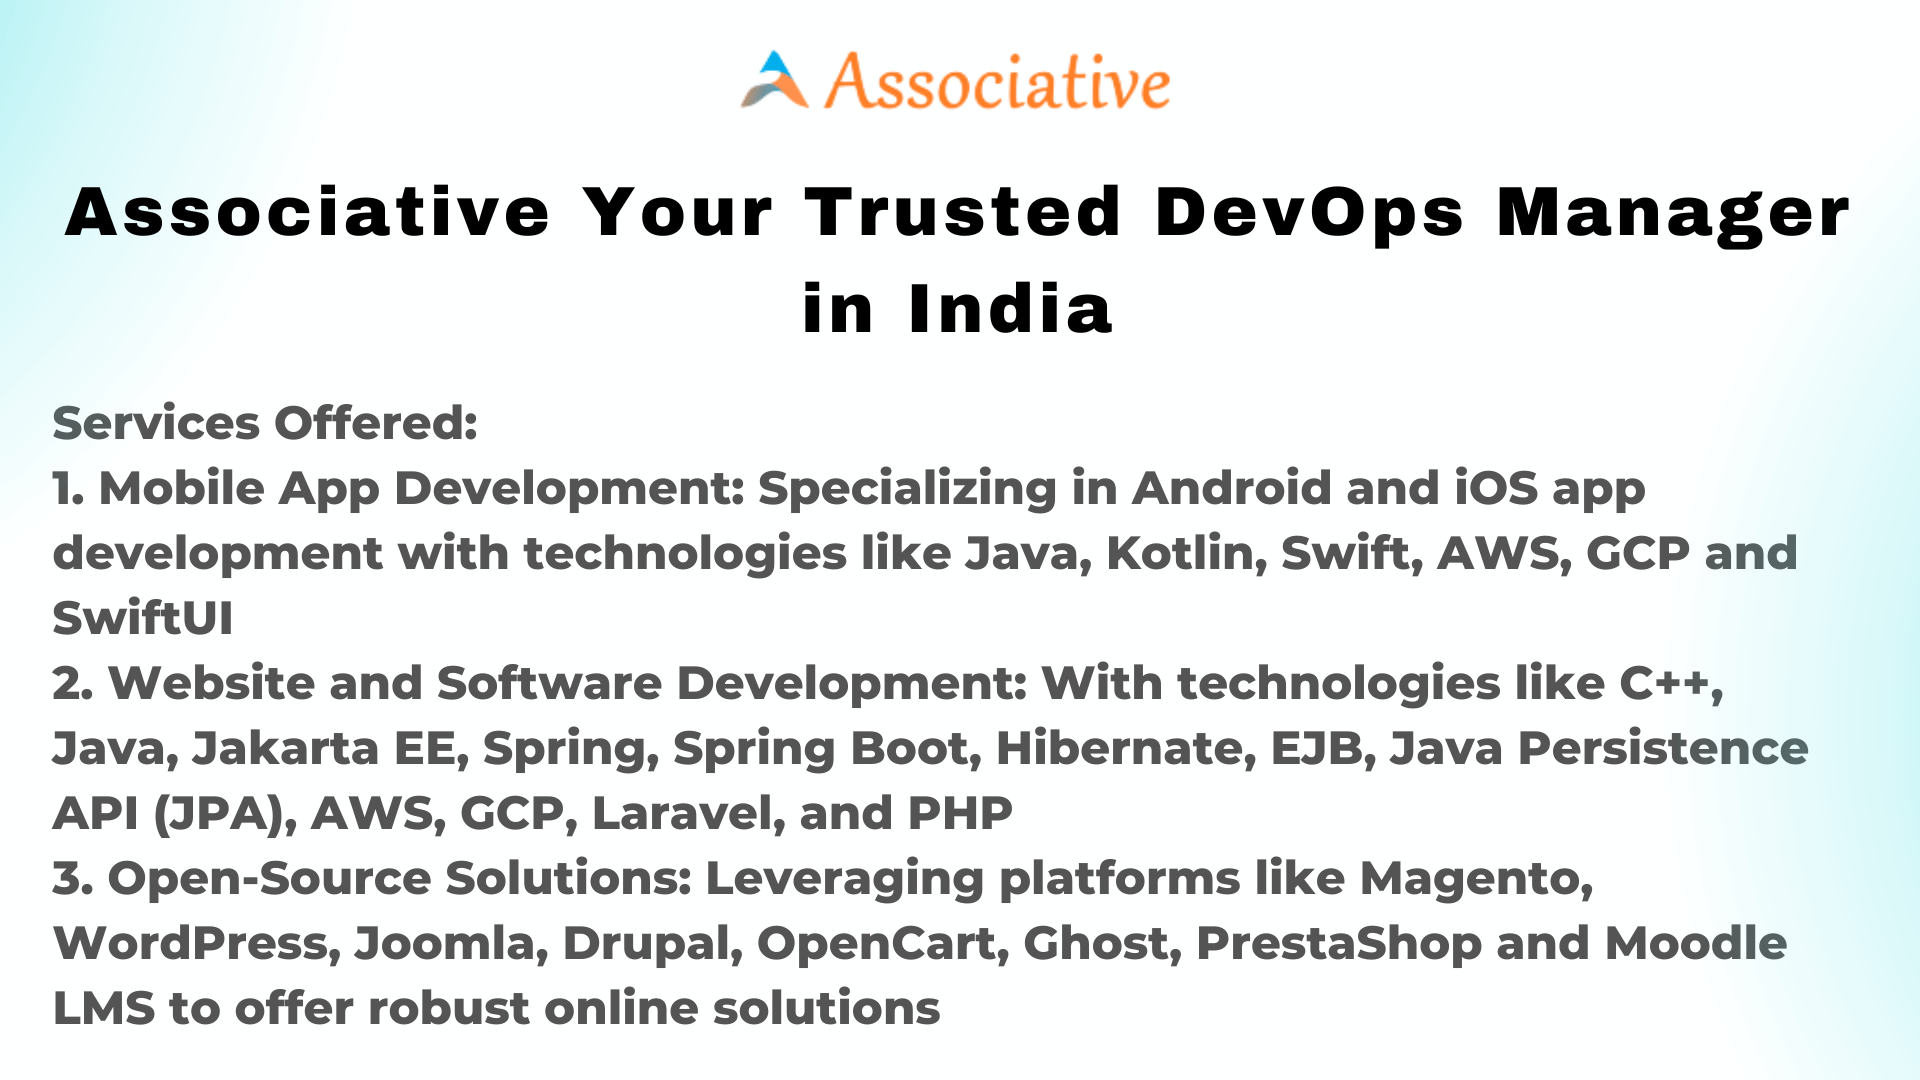 Associative Your Trusted DevOps Manager in India